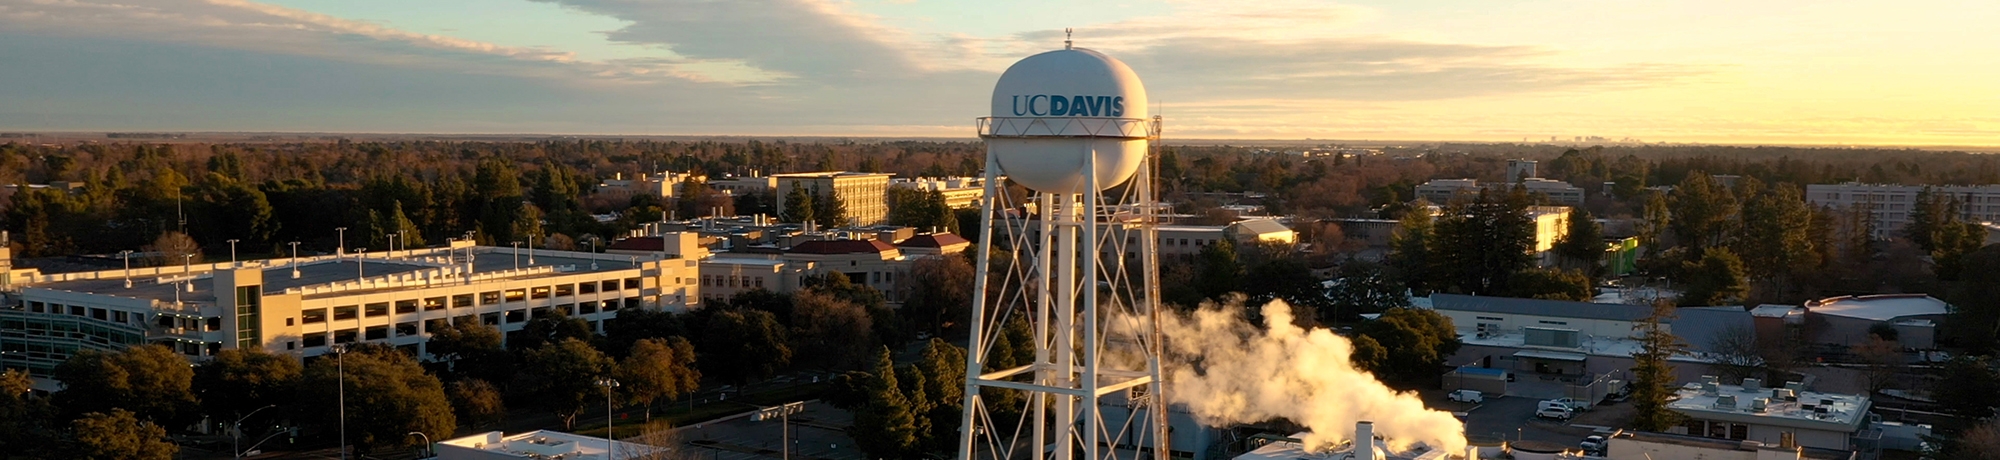 Aerial shot of UC Davis water tower. Campus is visible in the surroundings.